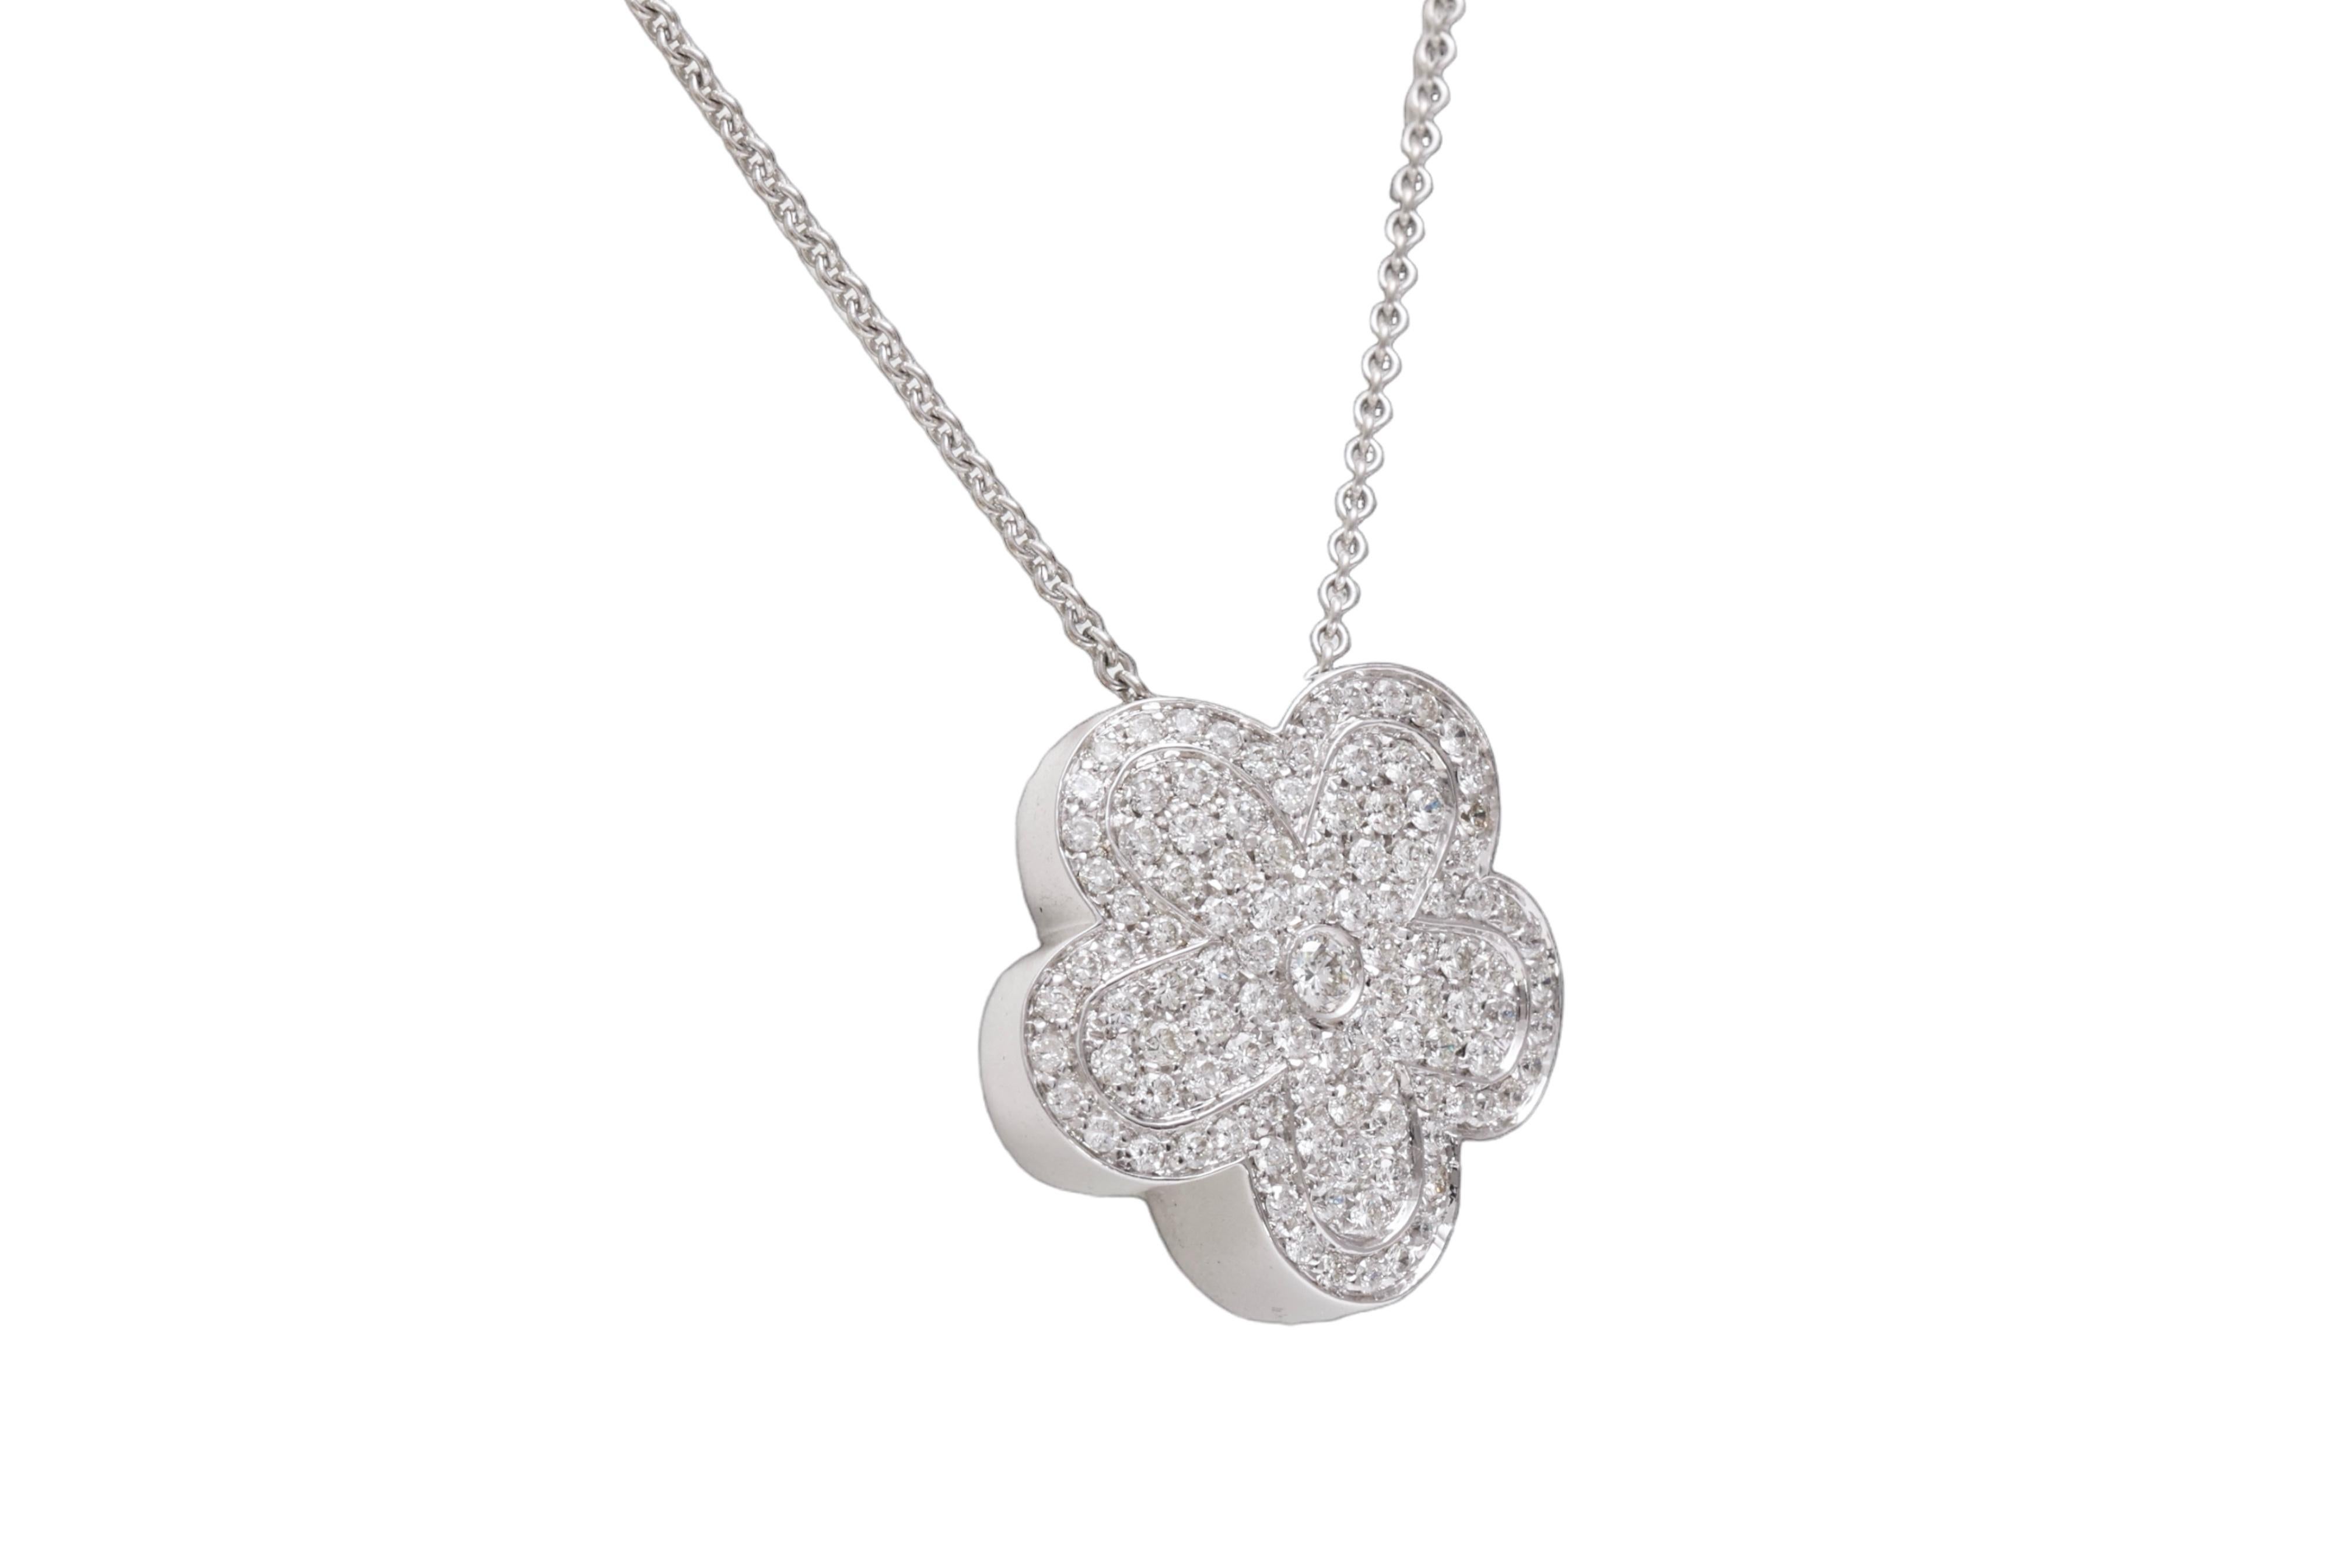 18 kt. White Gold Flower Pendant / Necklace With 1.18 ct. Diamonds For Sale 2